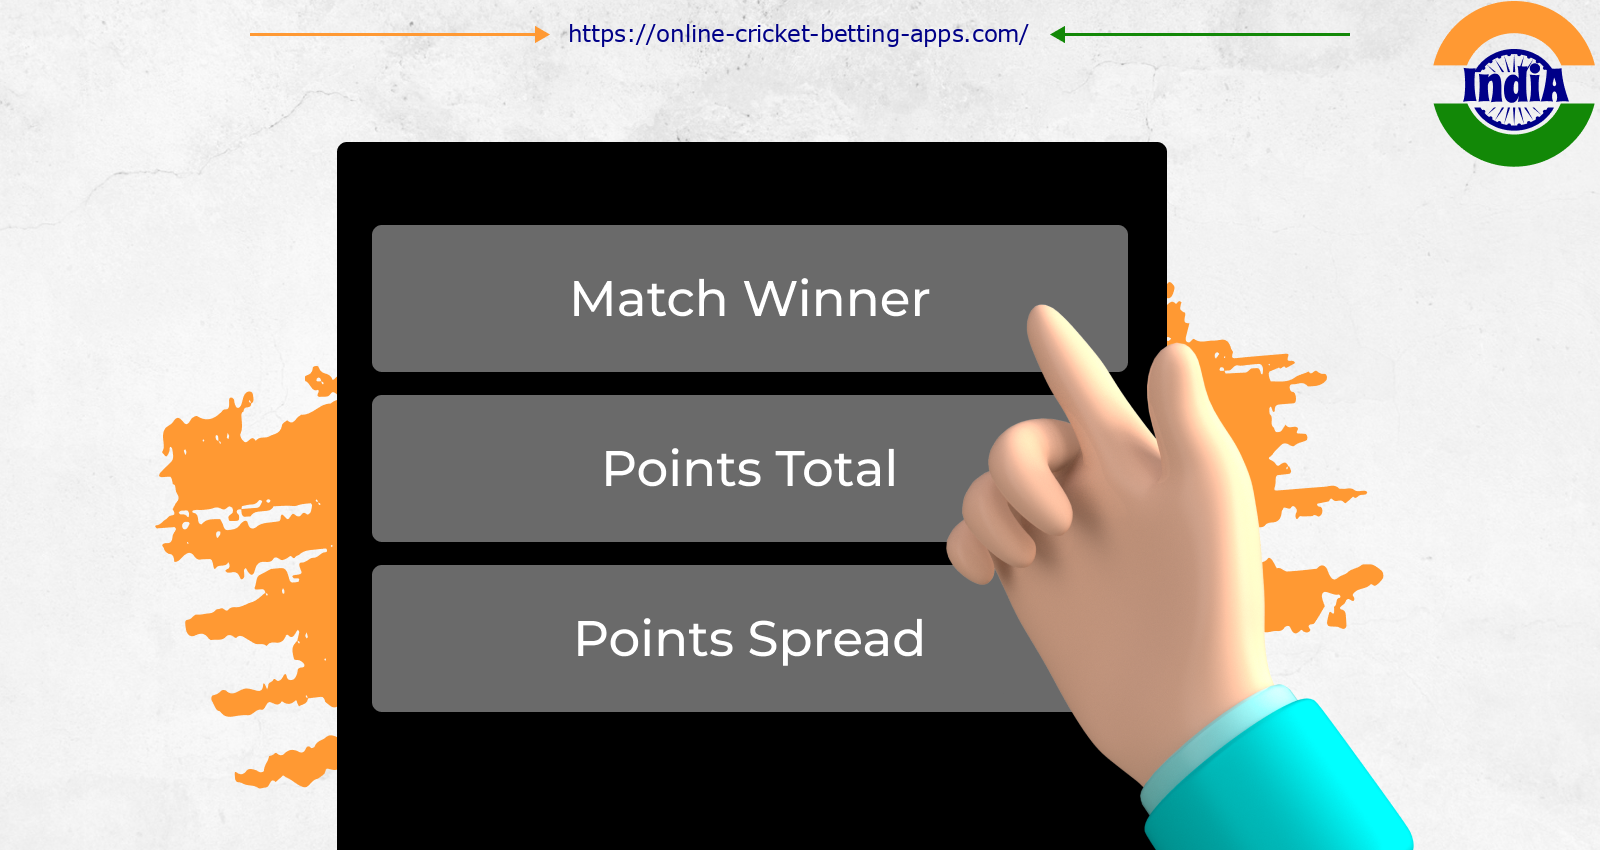 After selecting the match, Indian bettors have to choose among various betting markets